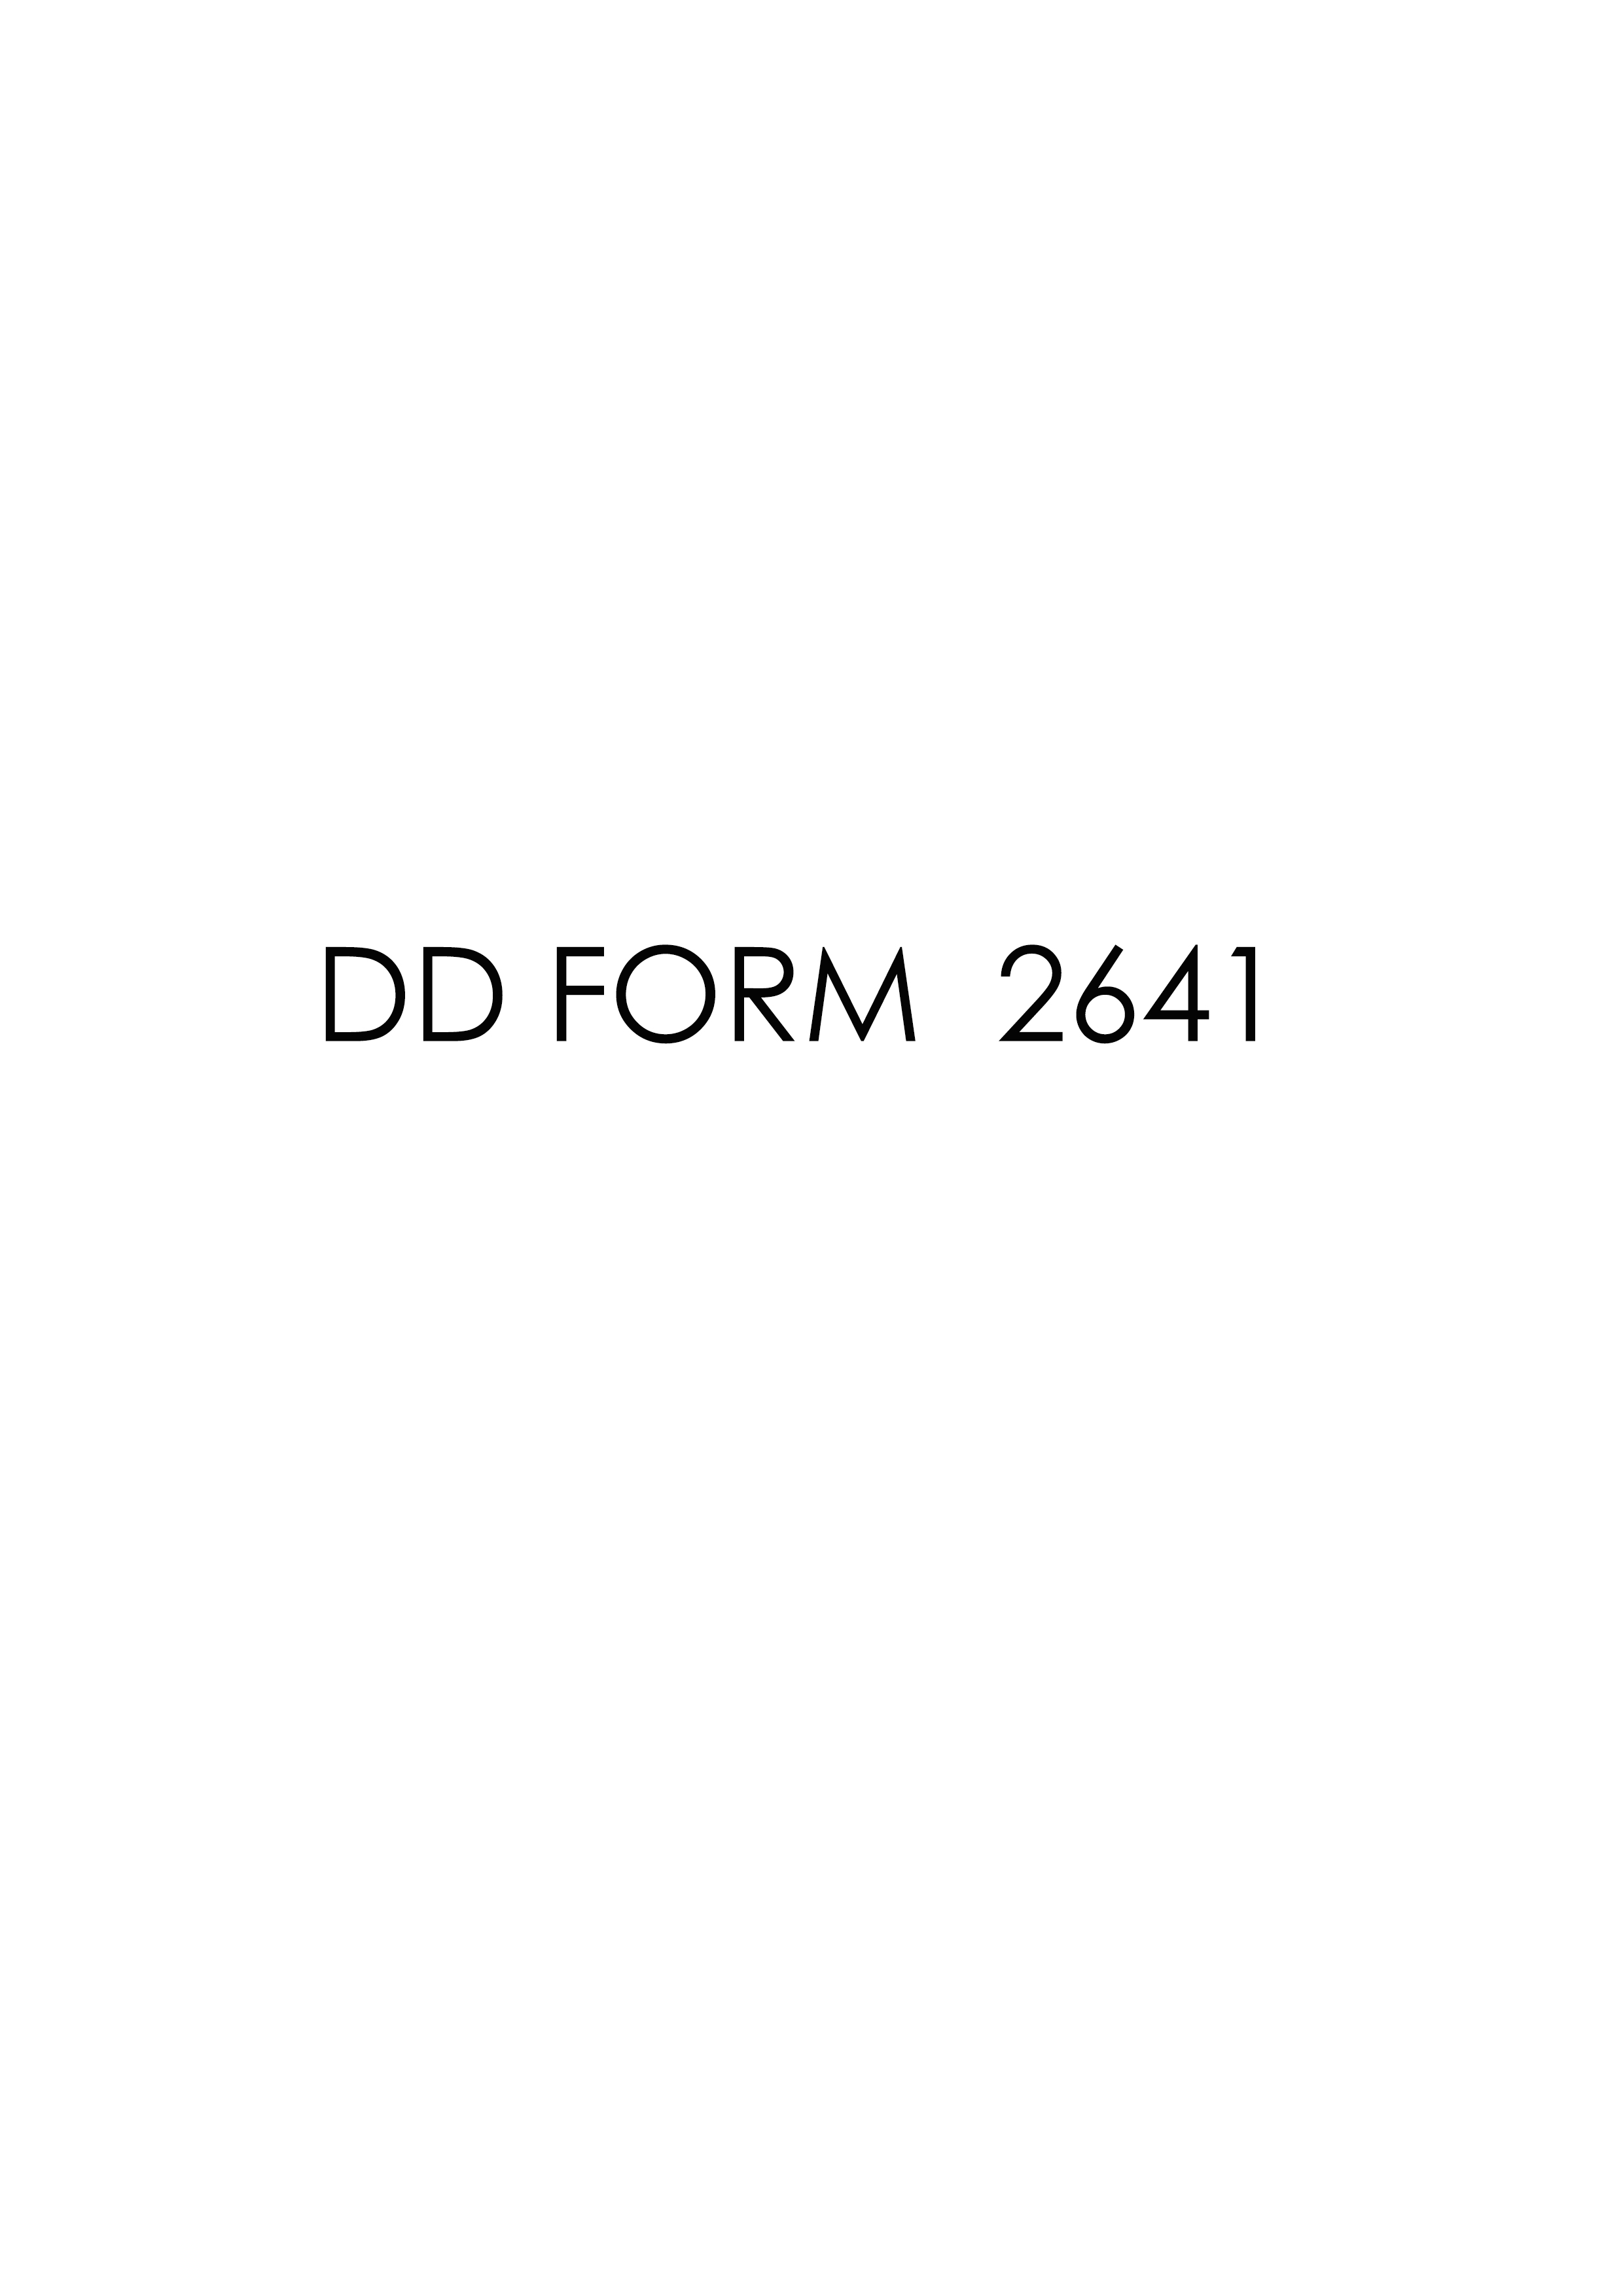 Download Fillable dd Form 2641